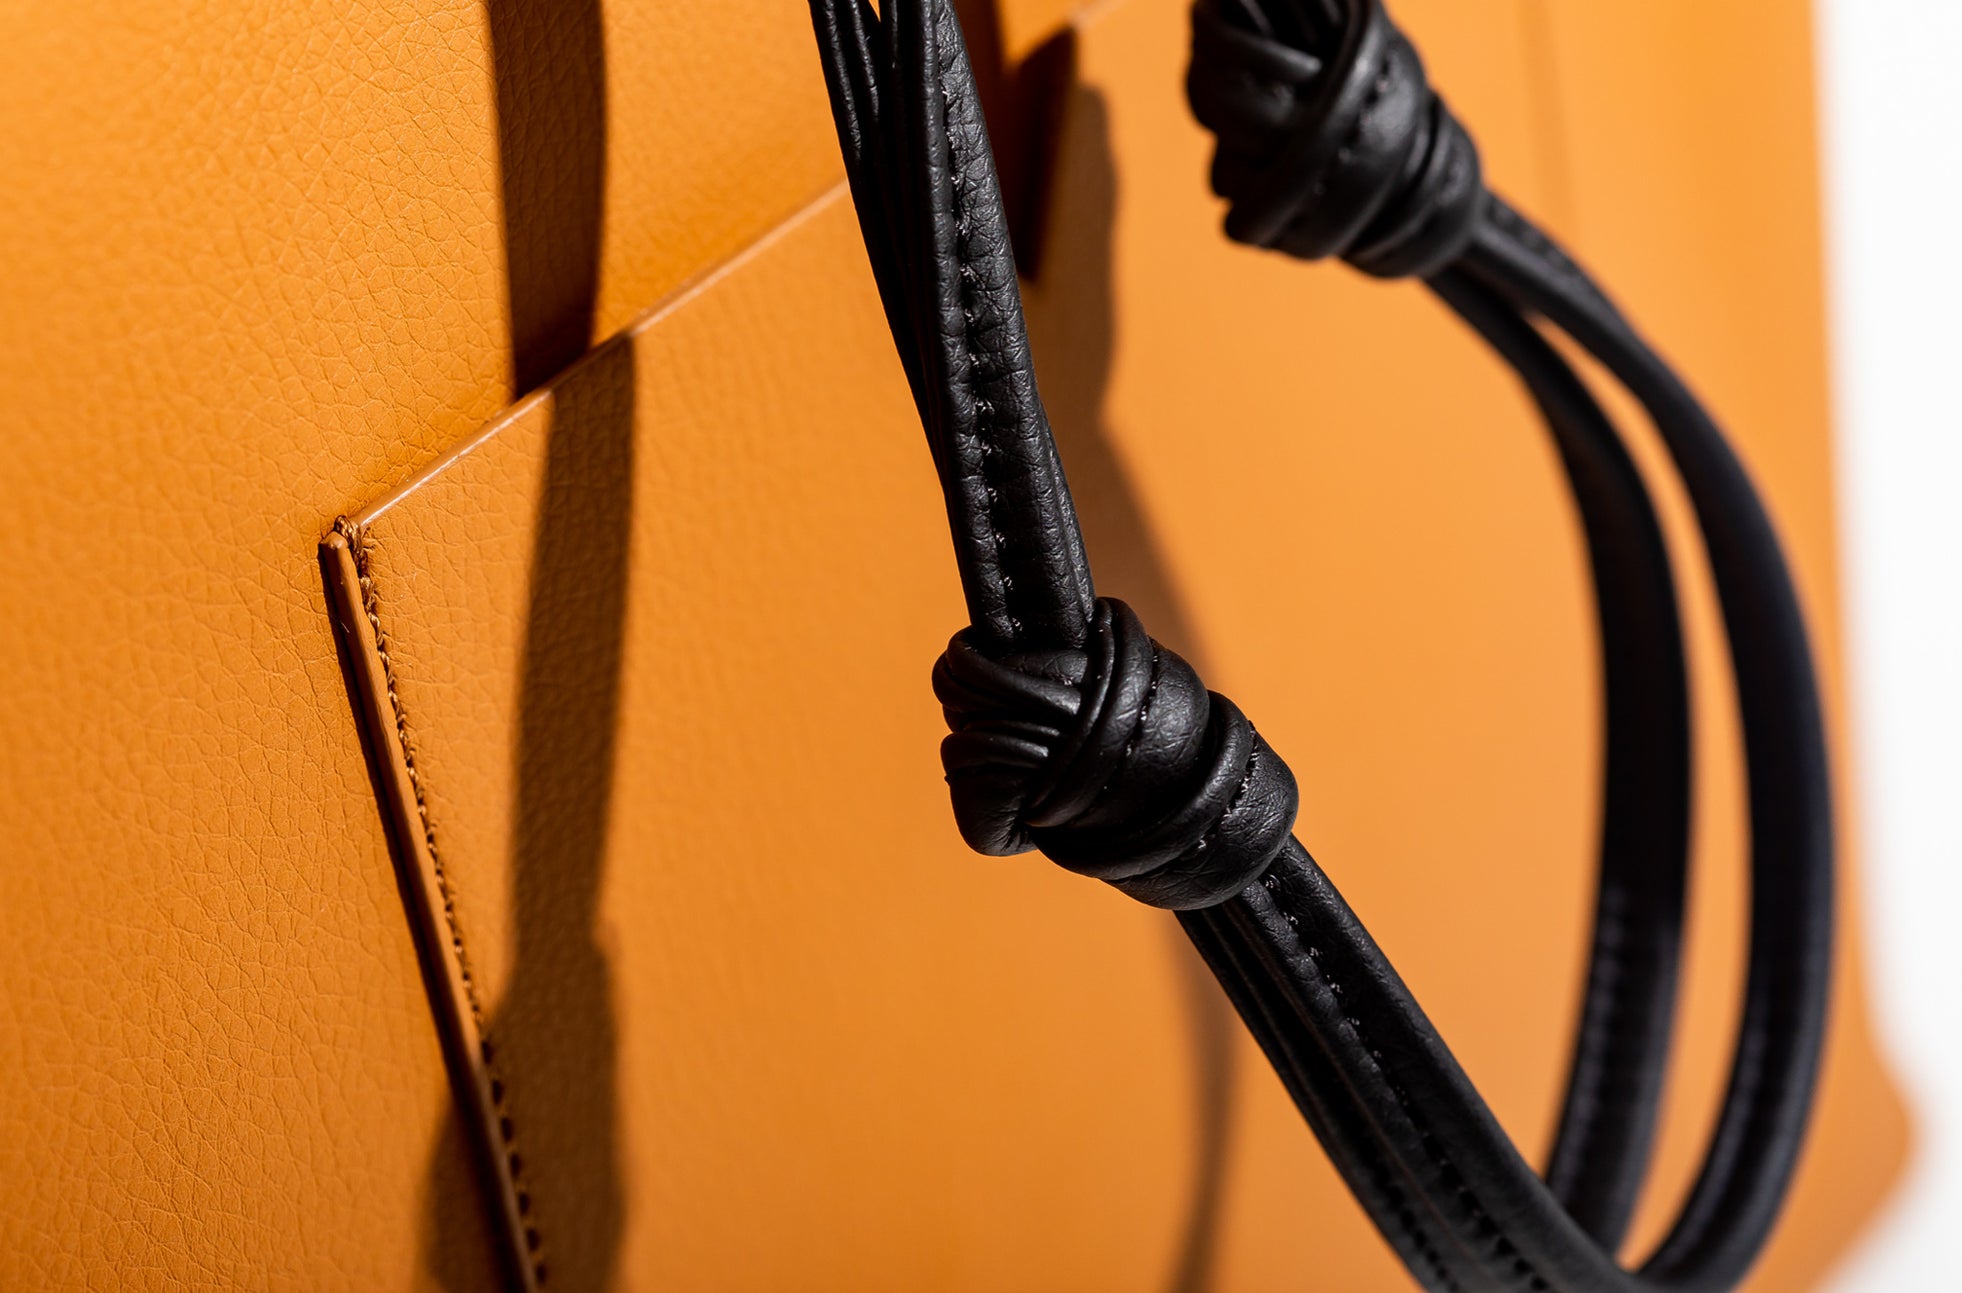 The Market Tote in Technik-Leather in Caramel and Black image 4